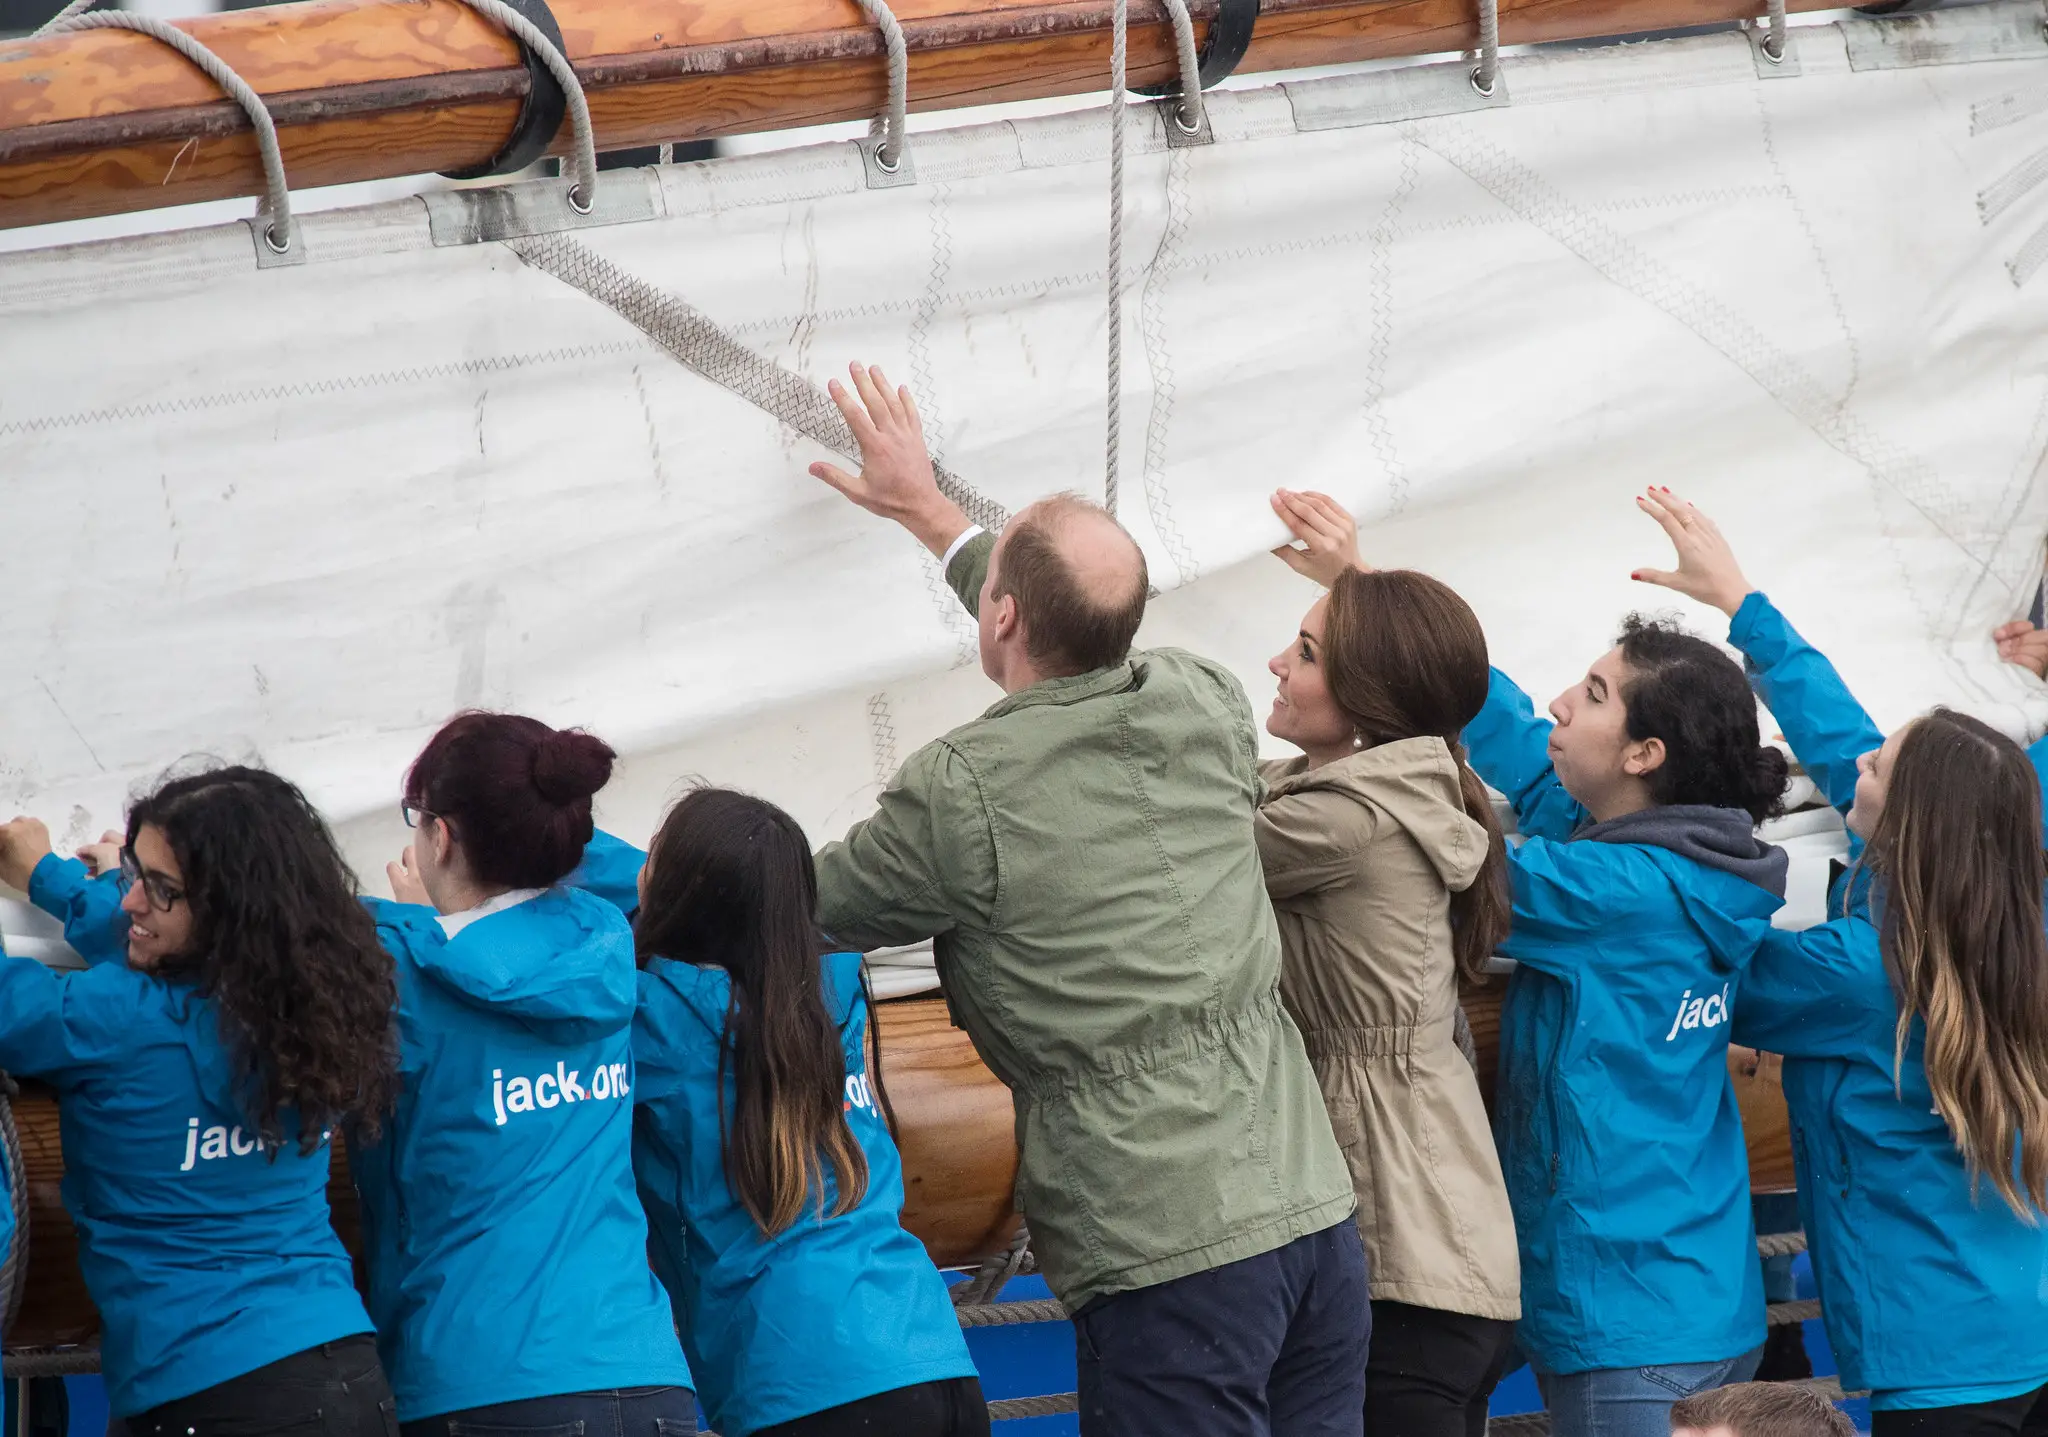 The Duke and Duchess of Cambridge tried their hand at helming the ship in Canada